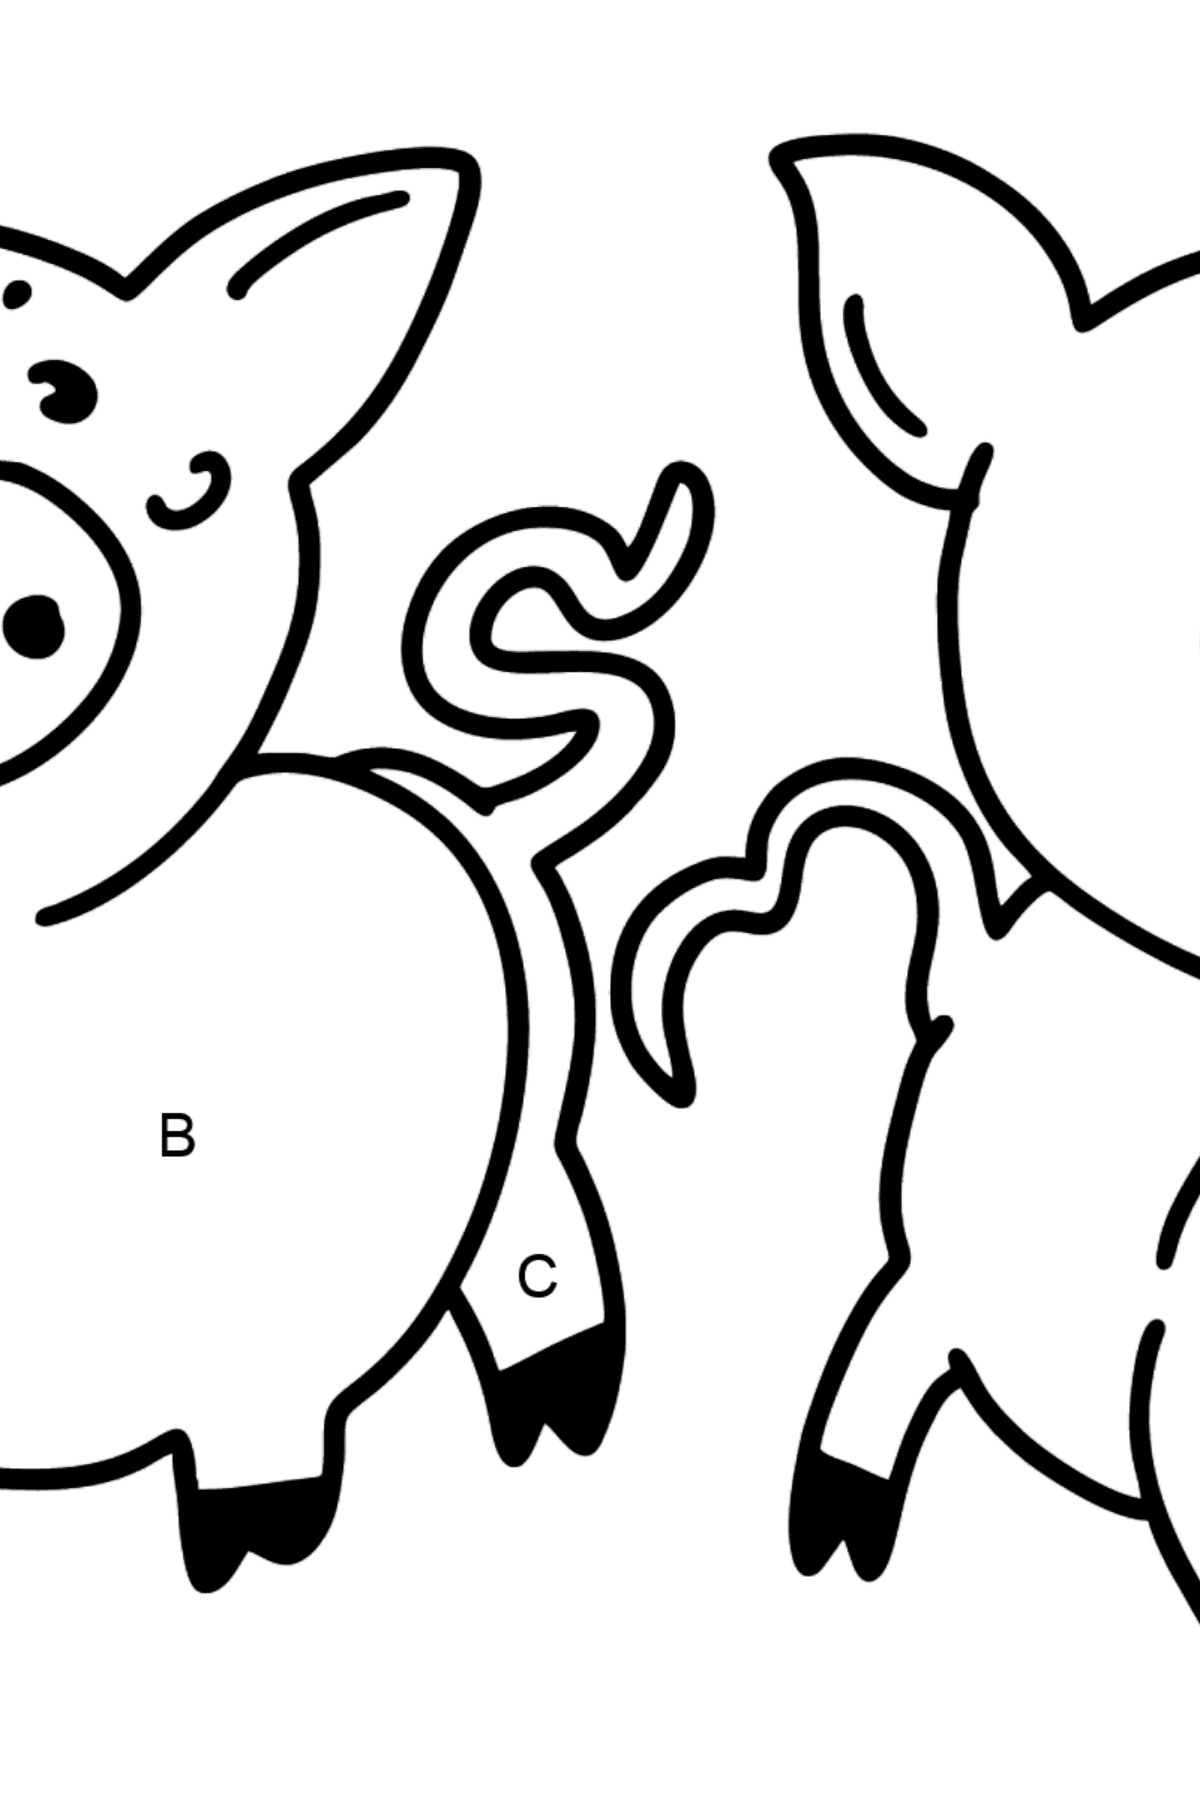 Piglets coloring page - Coloring by Letters for Kids